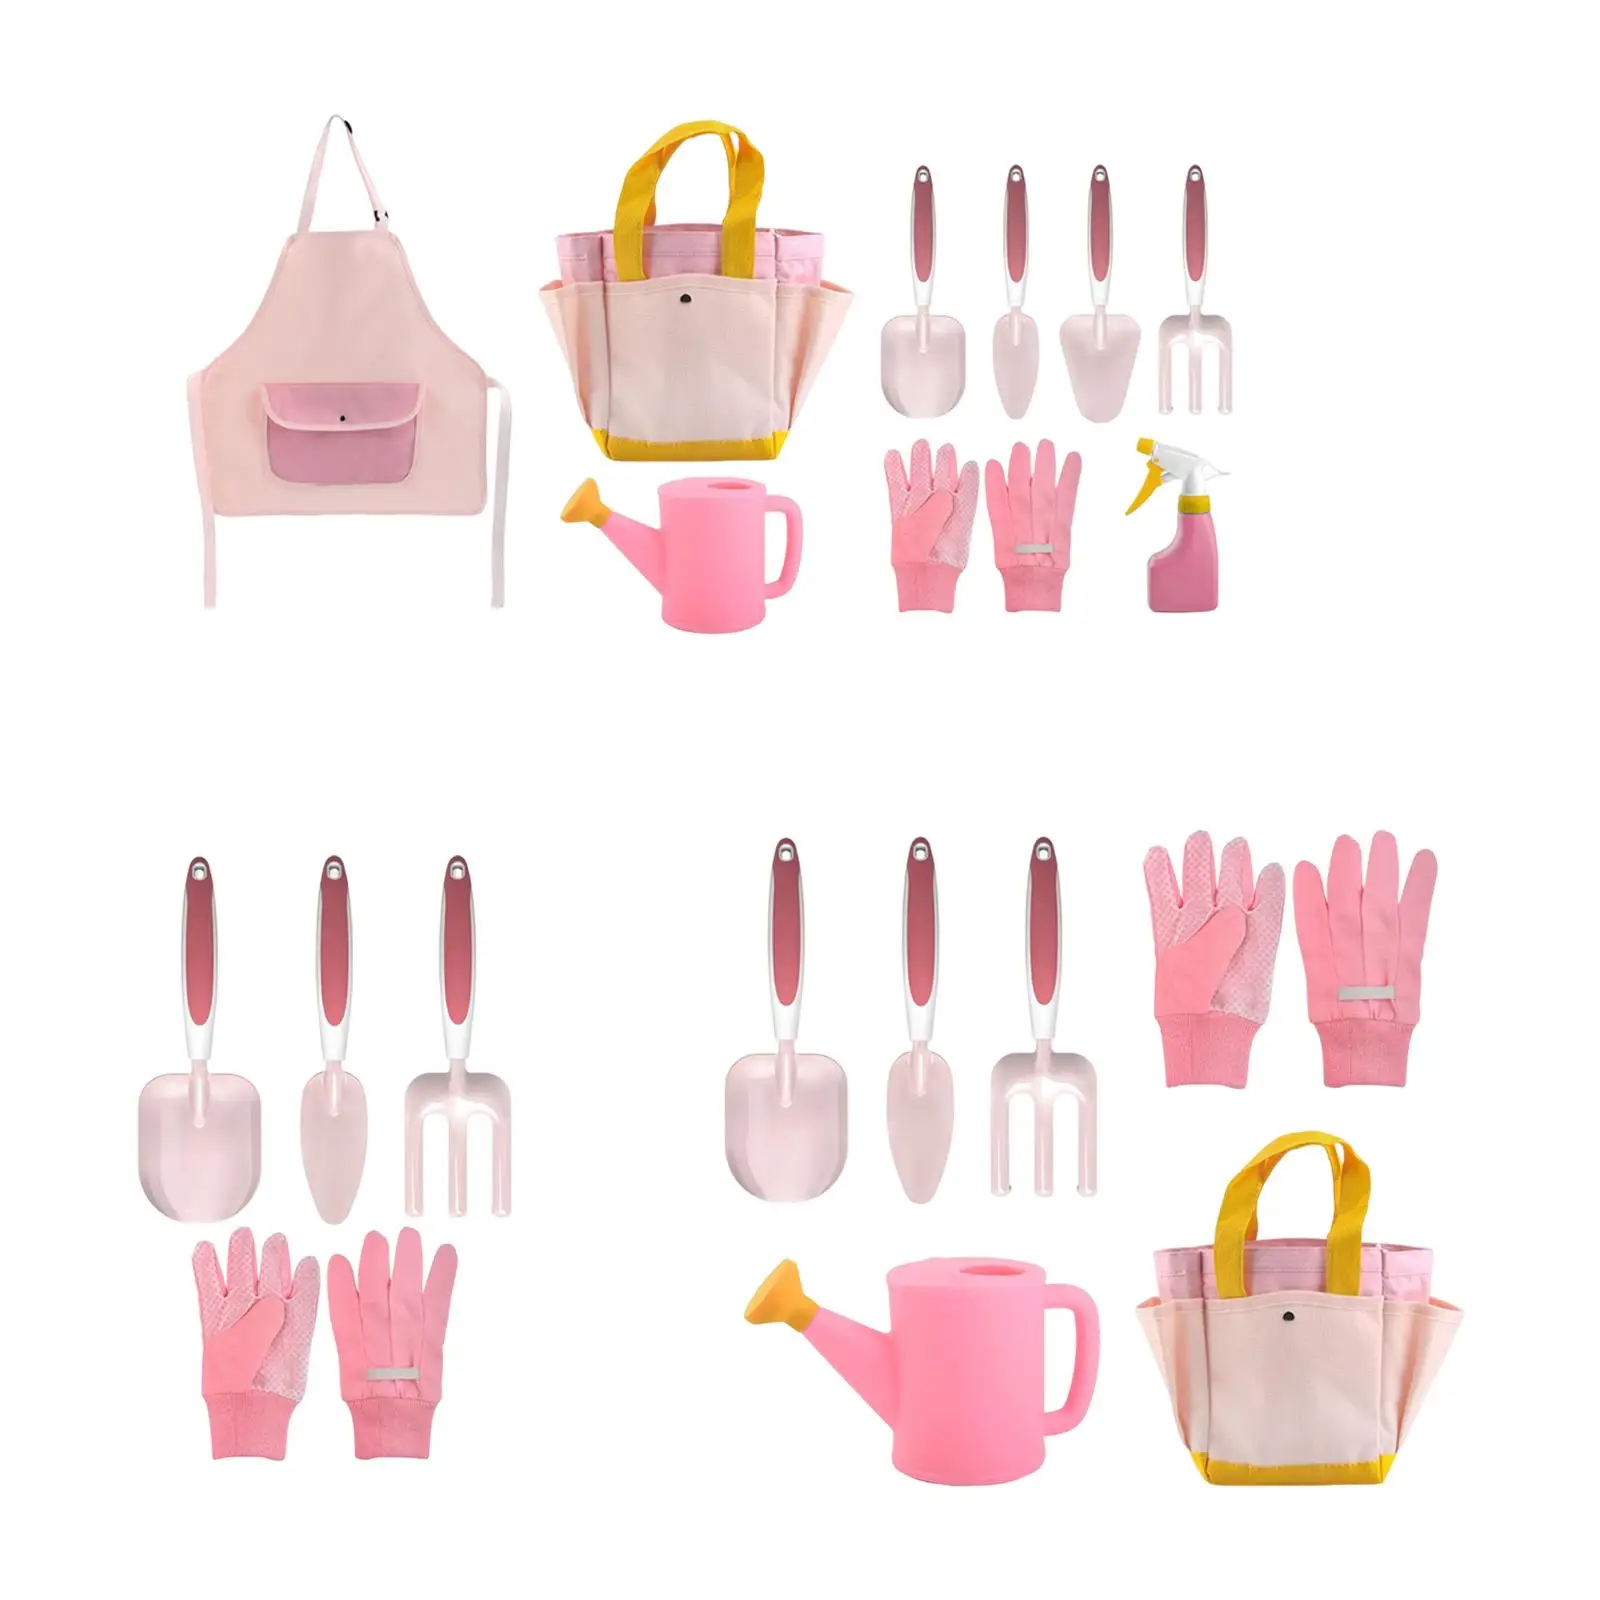 Children Garden Tool Set for Girl Accessory , to Develop Child Imagination and Physical Activity Compact Size Holiday Gifts